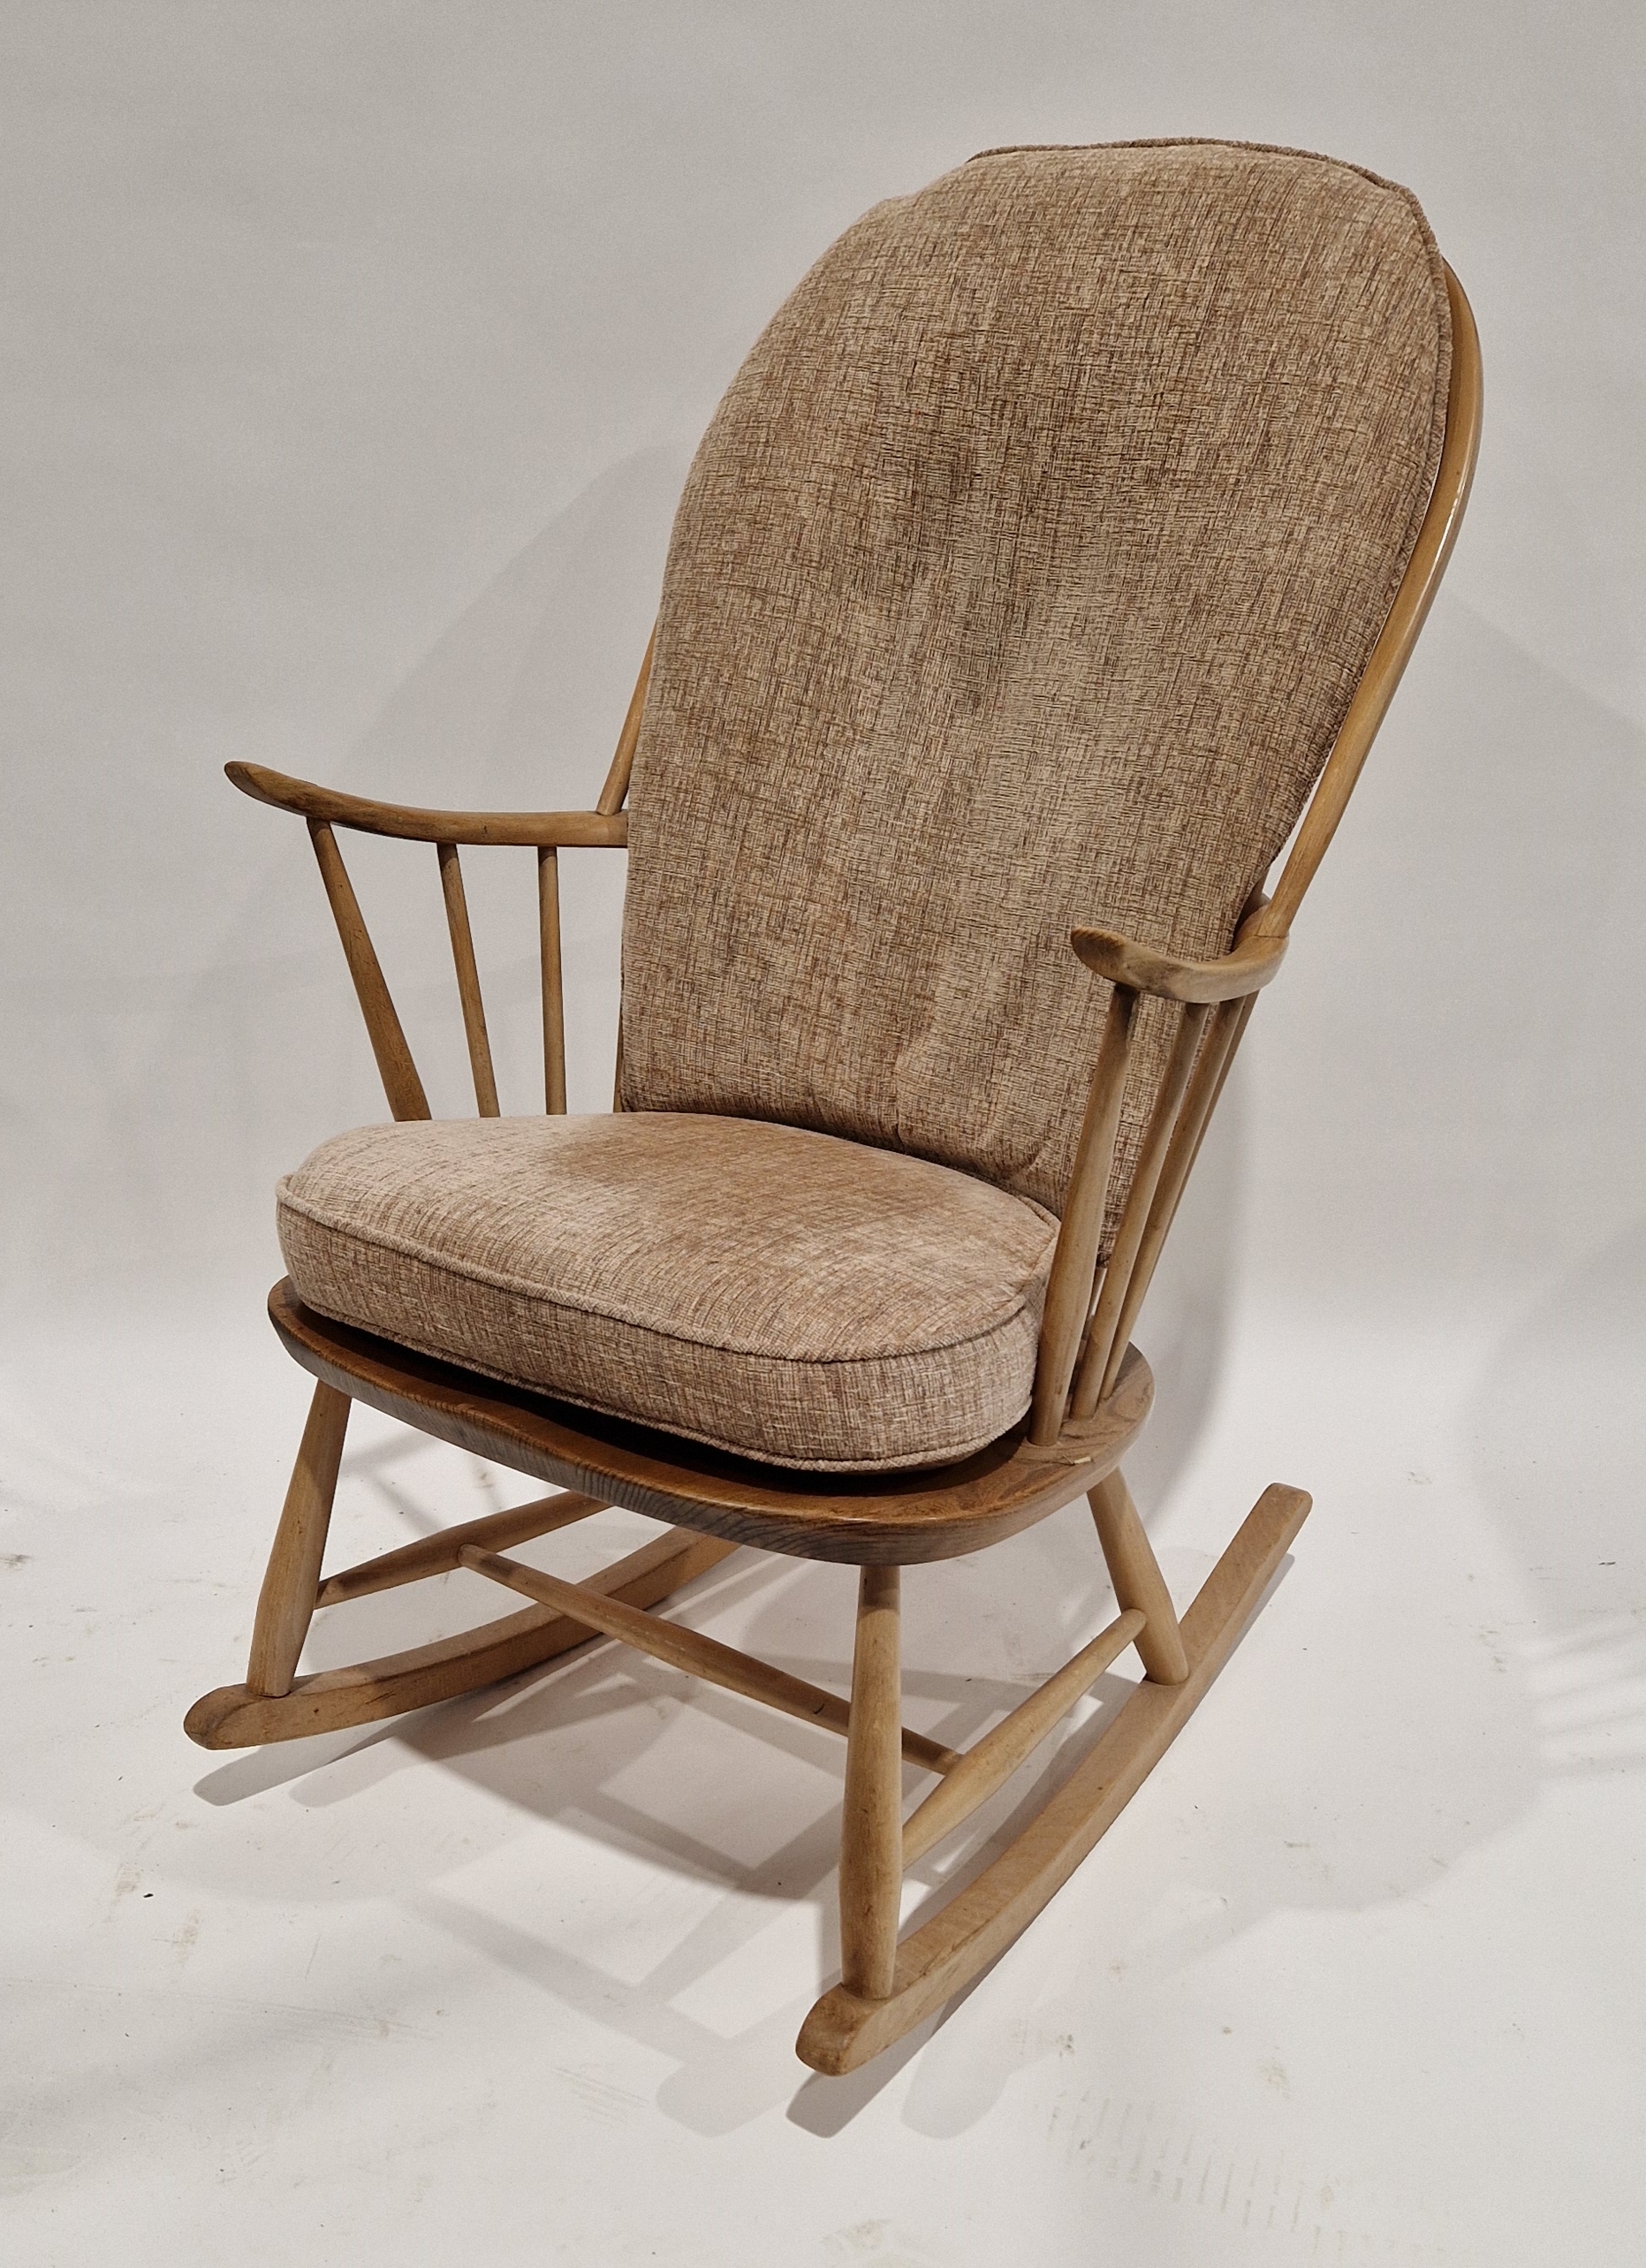 Ercol comb-back double bow "Chairmakers" Windsor rocking chair, the chair raised on sleigh runners